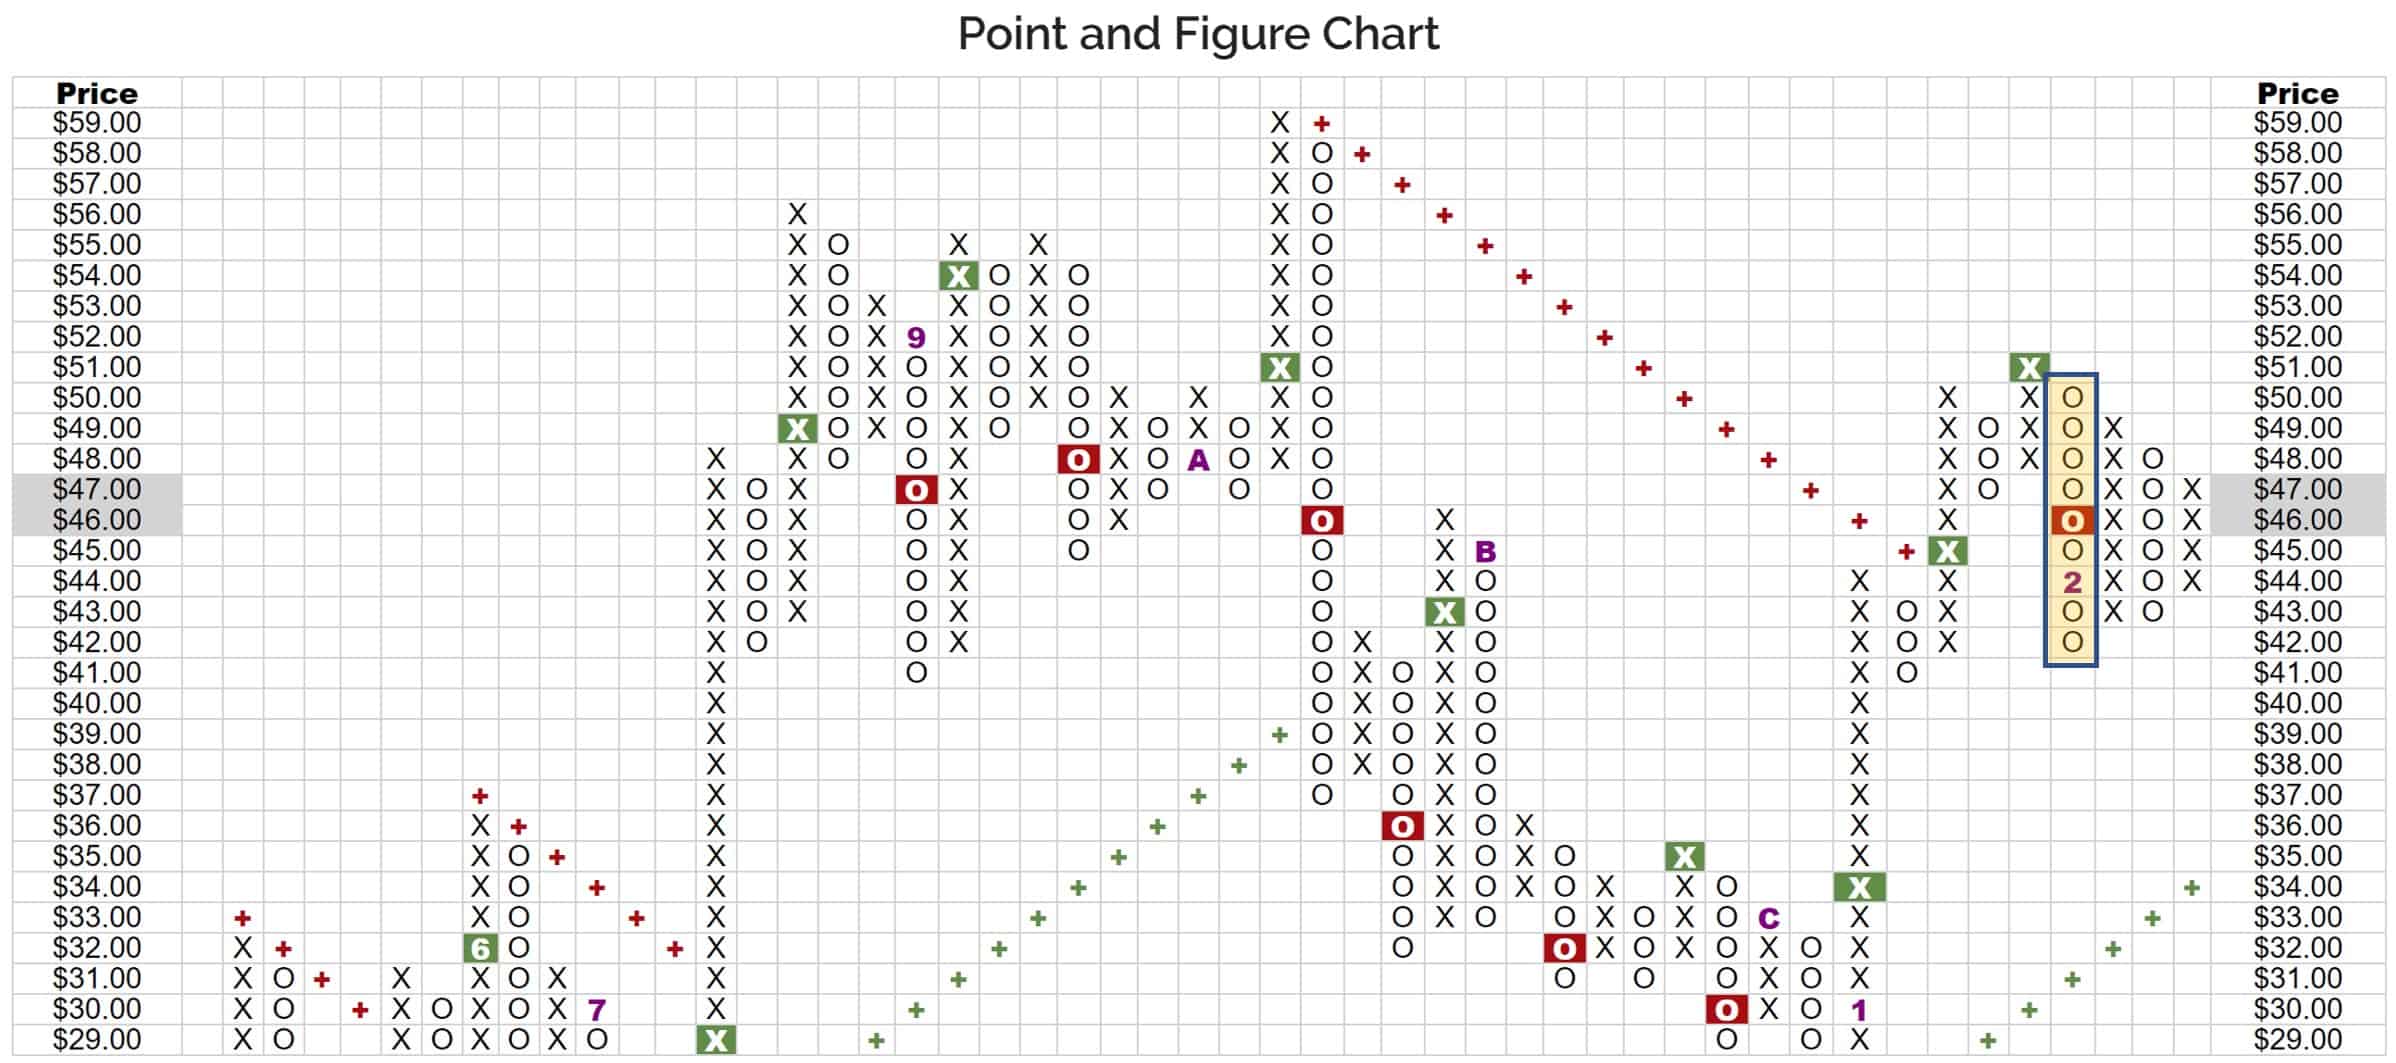 point and figure chart forex software